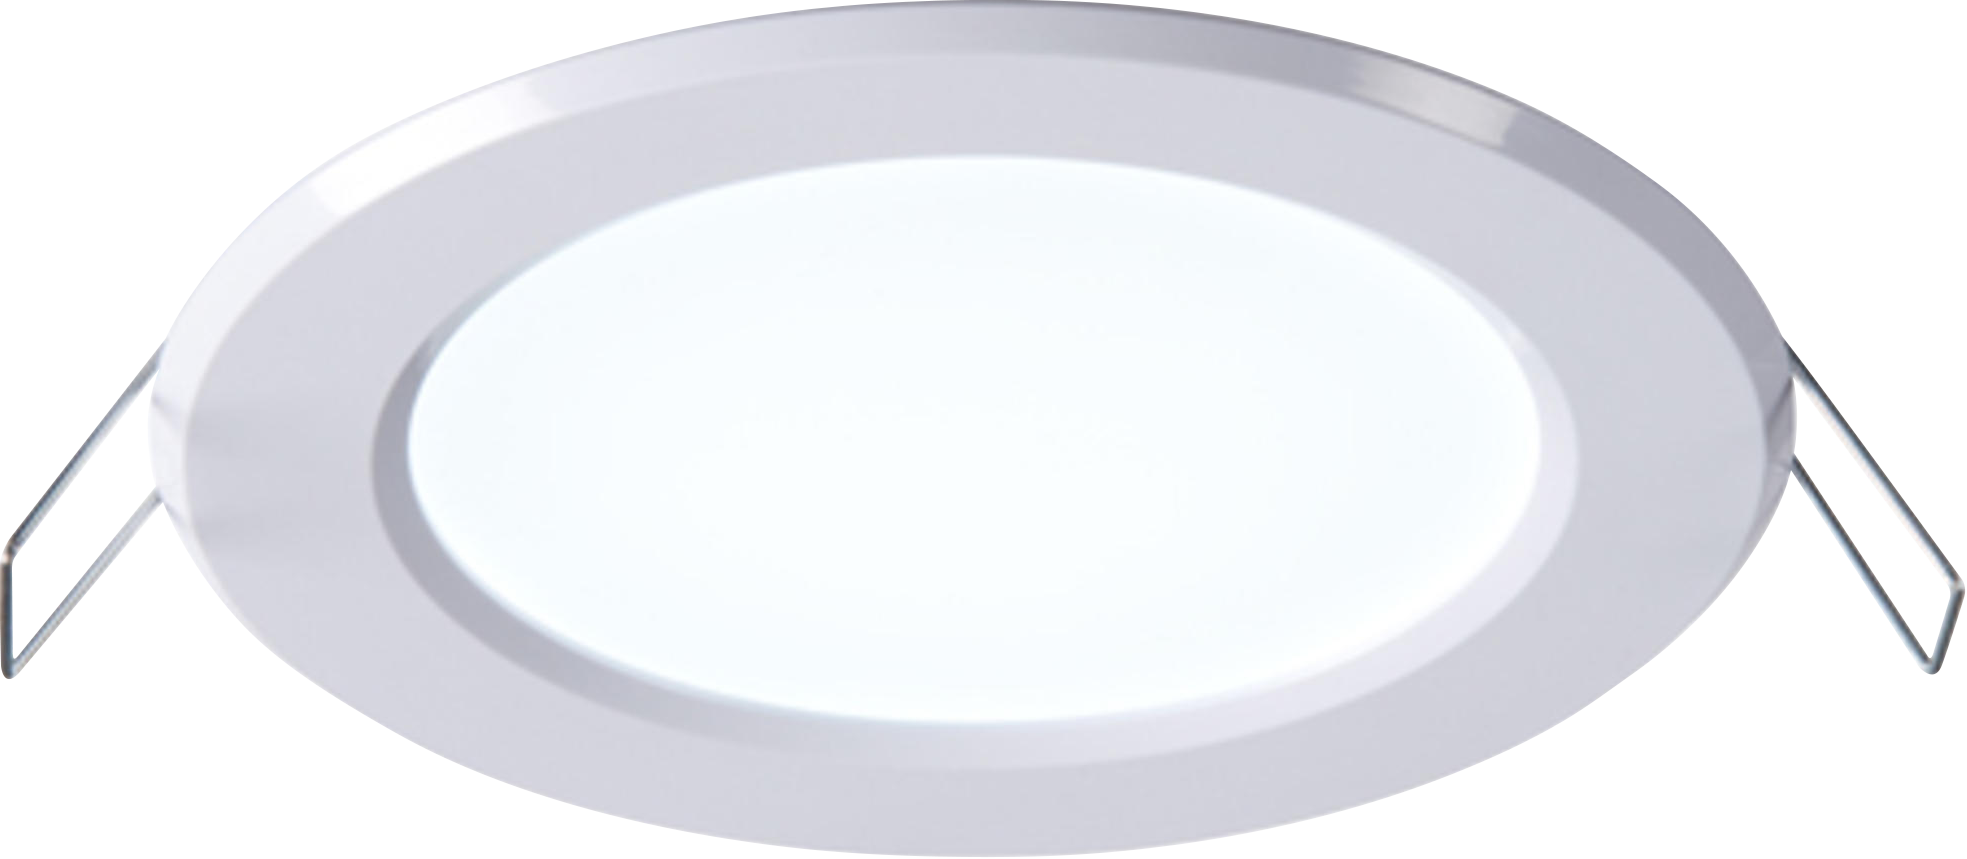 230V IP20 5W LED Panel Lamp With Integrated Driver 4000K - PLED5W - SOLD-OUT!! 